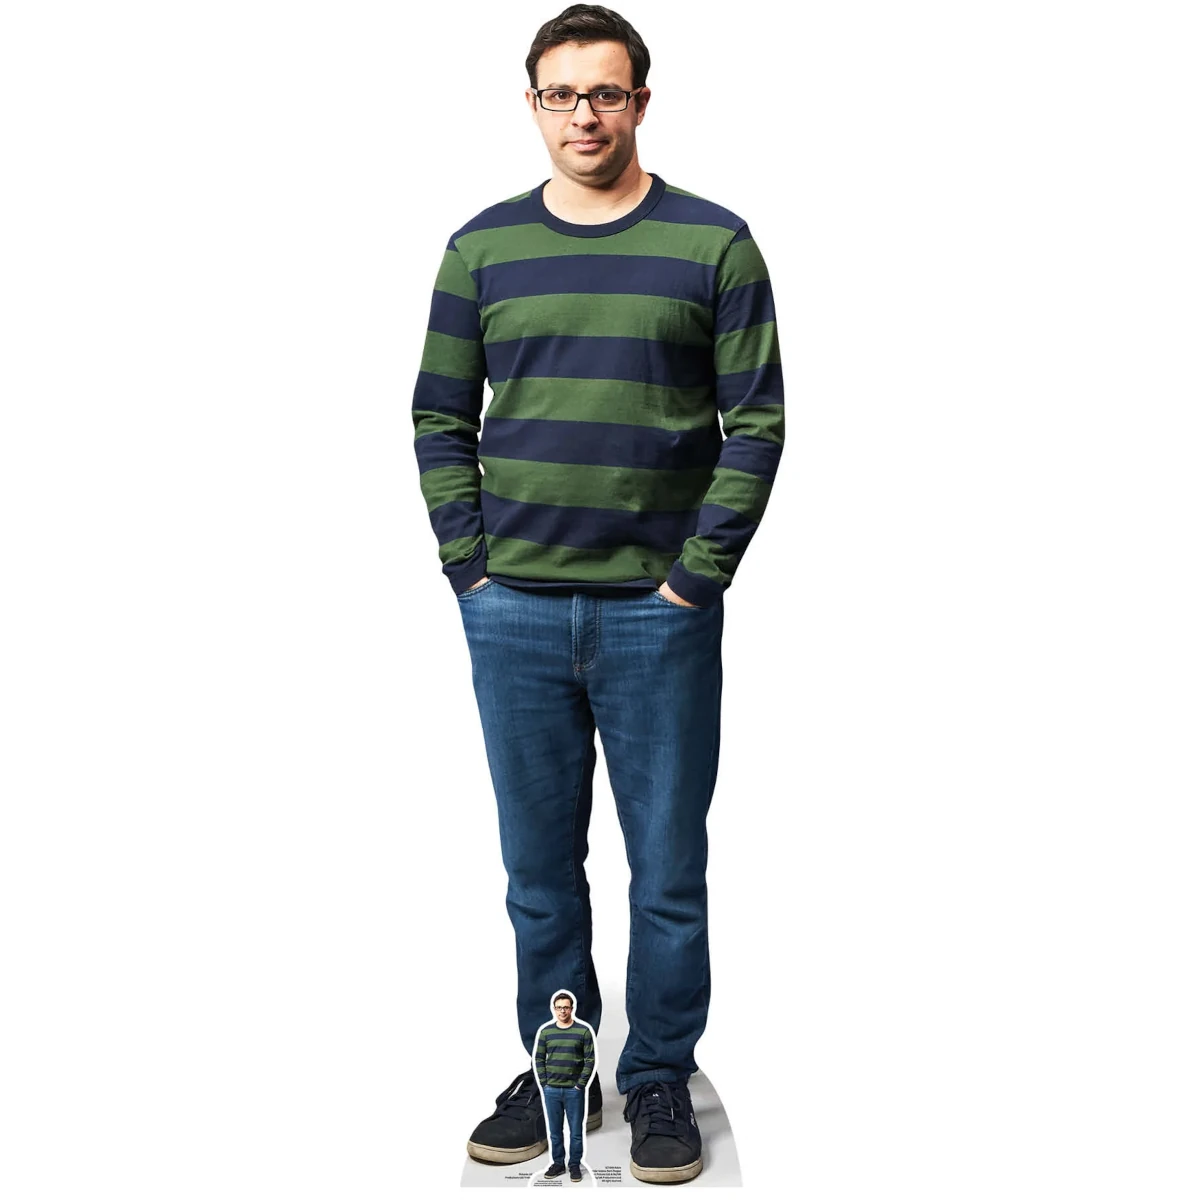 SC1569 Adam (Friday Night Dinner) Official Lifesize + Mini Cardboard Cutout Standee Front